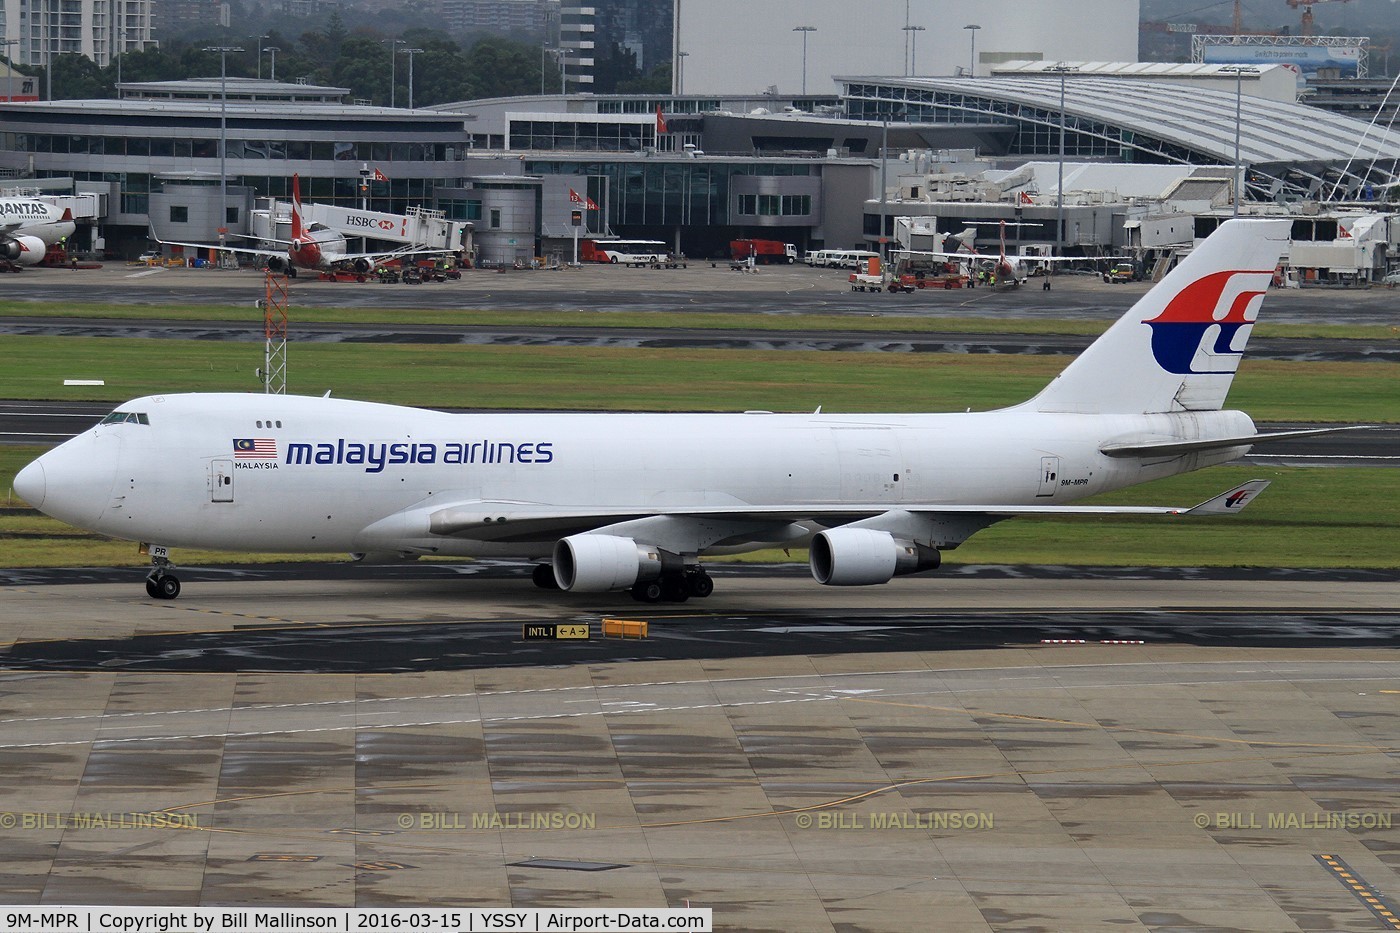 9M-MPR, 2006 Boeing 747-4H6F C/N 28434, taxiing to cargo bays